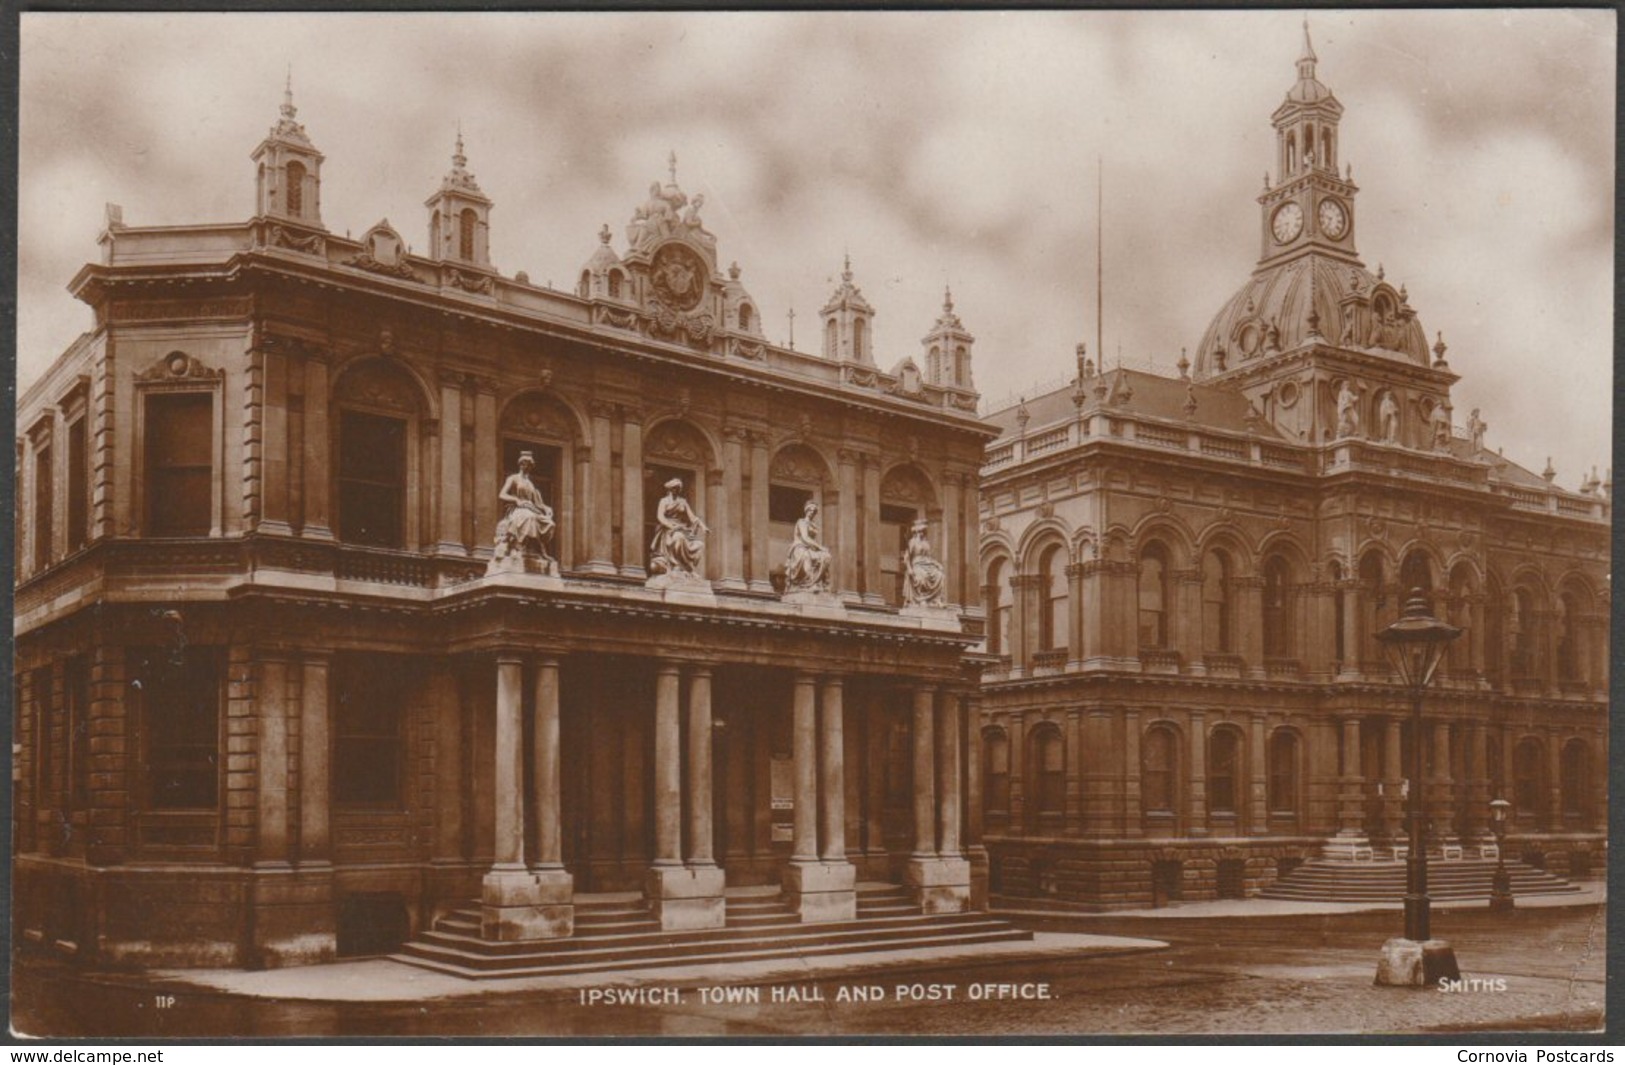 Town Hall And Post Office, Ipswich, Suffolk, C.1910s - Smiths RP Postcard - Ipswich